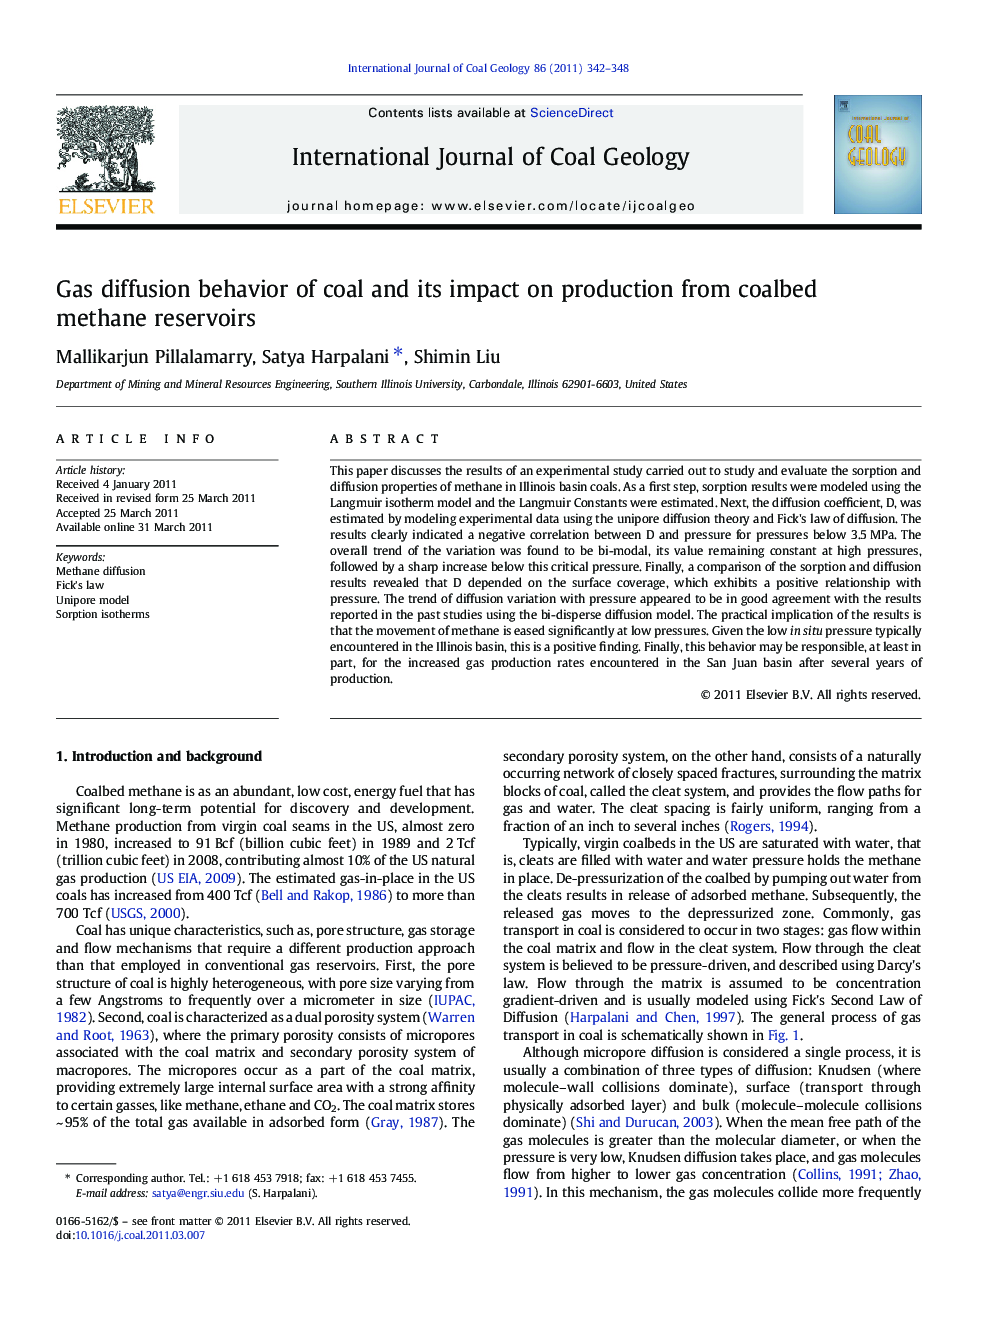 Gas diffusion behavior of coal and its impact on production from coalbed methane reservoirs